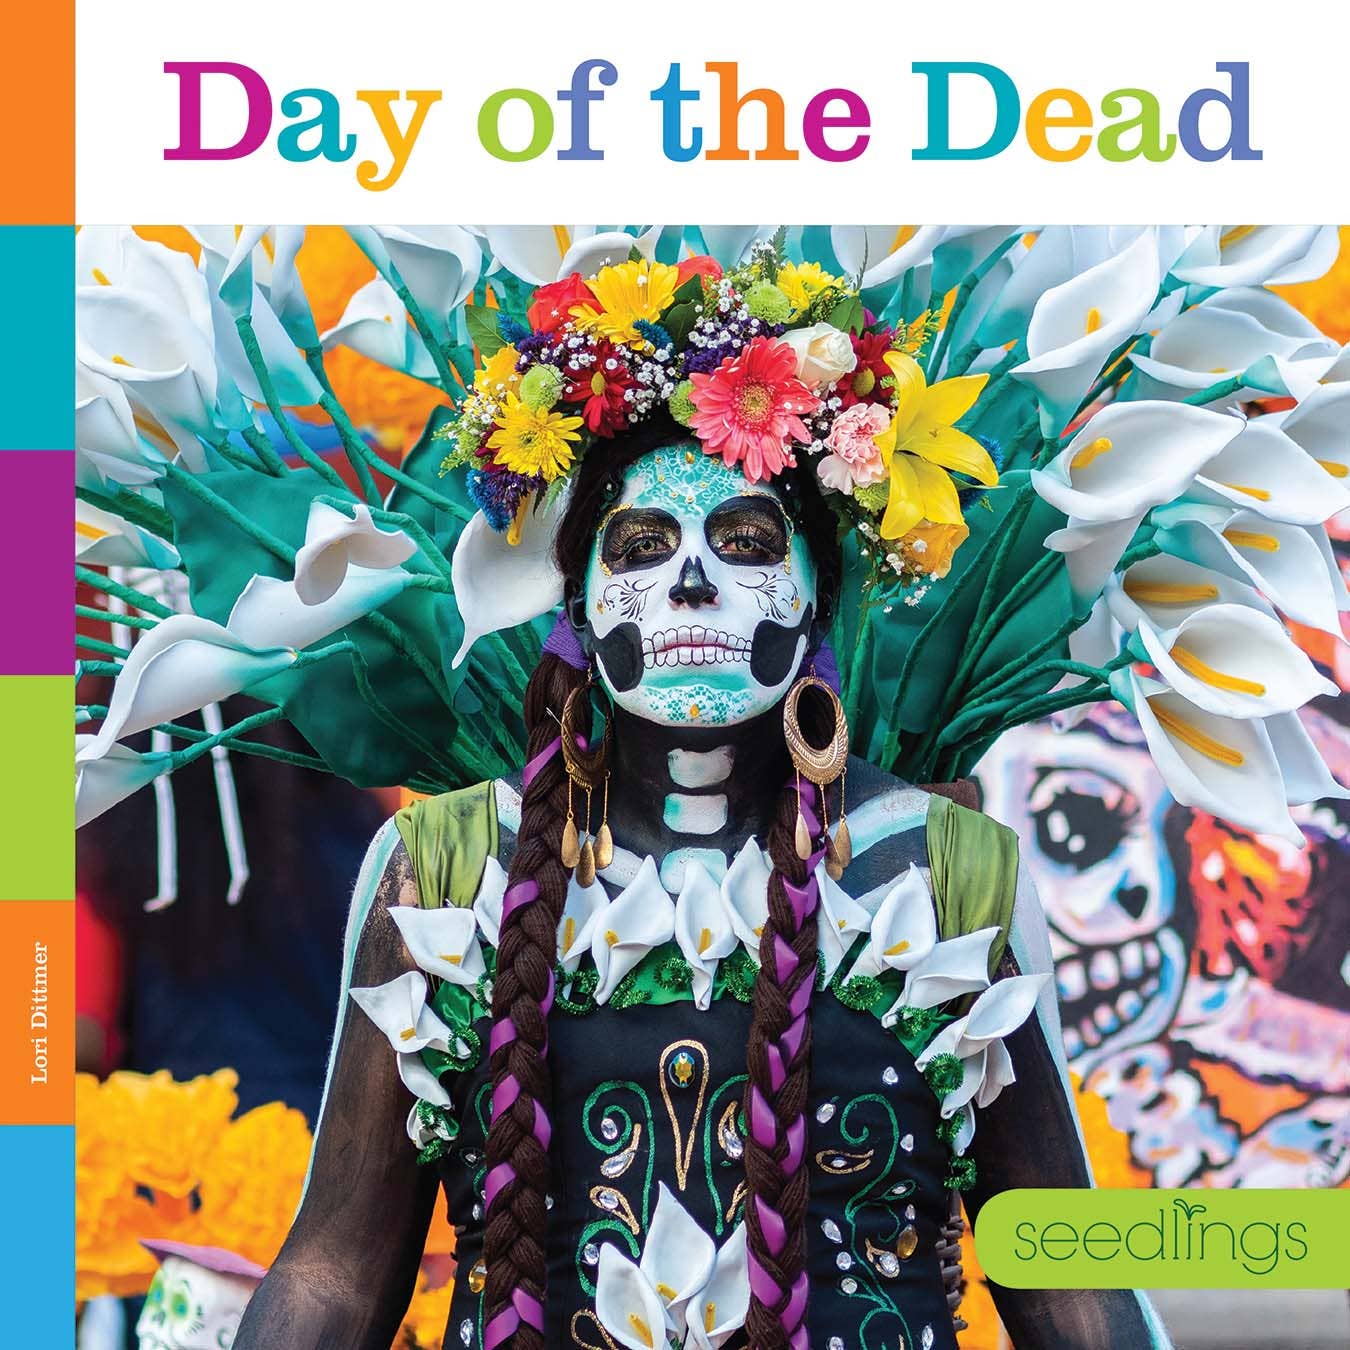 Cover photo for “Seedlings: Day of the Dead”.